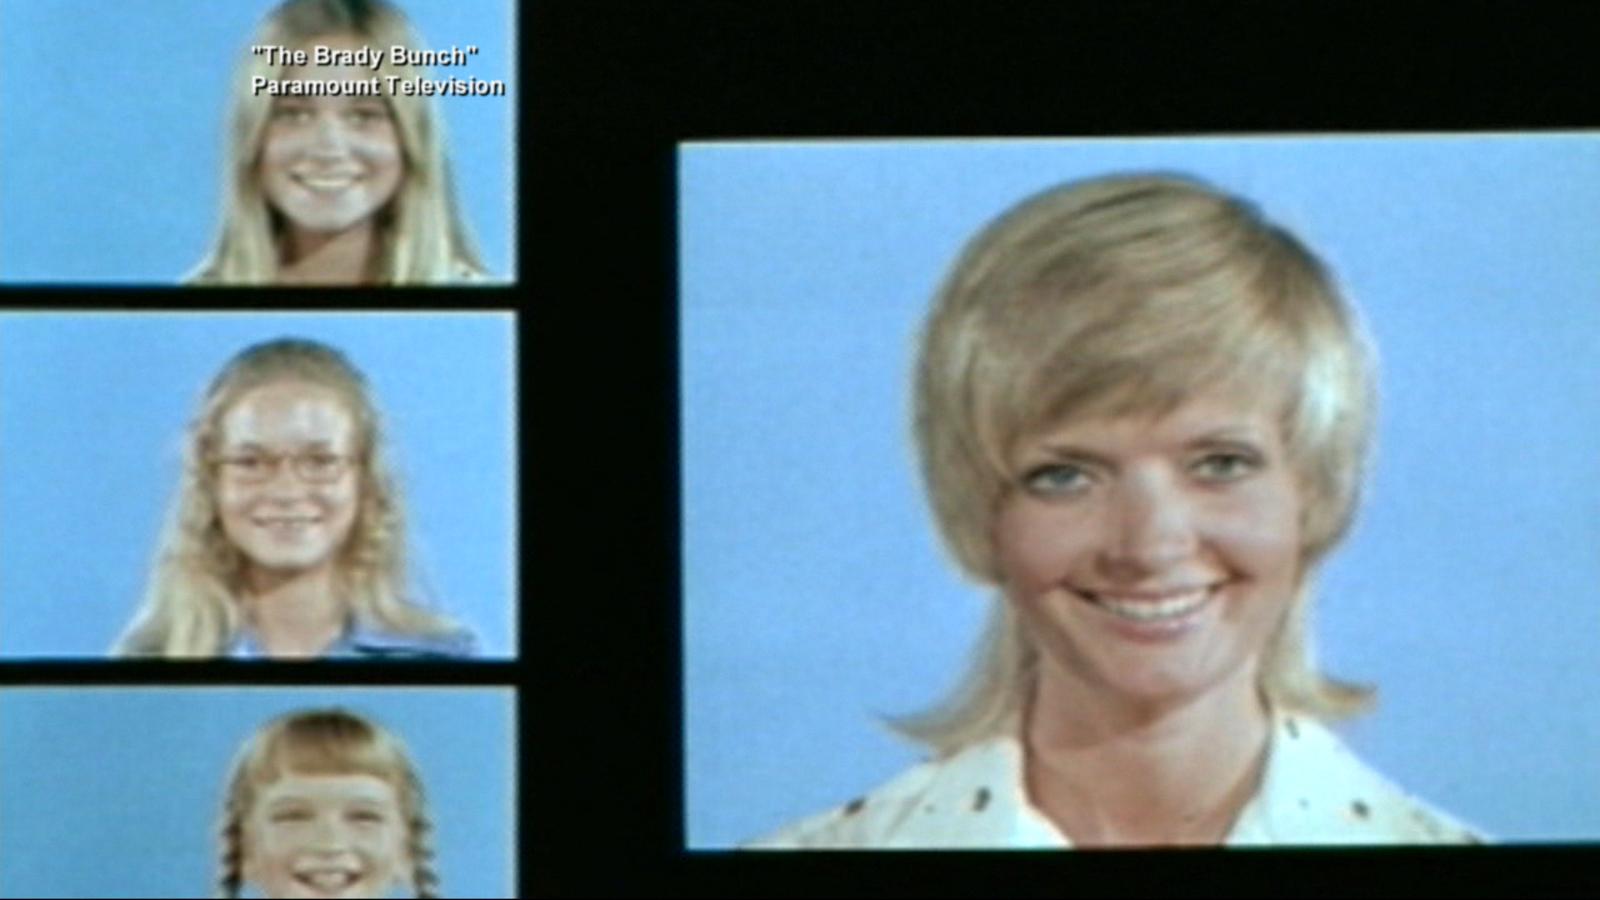 Pictures Showing For Brady Bunch Porn Florence Henderson Mypornarchive Net